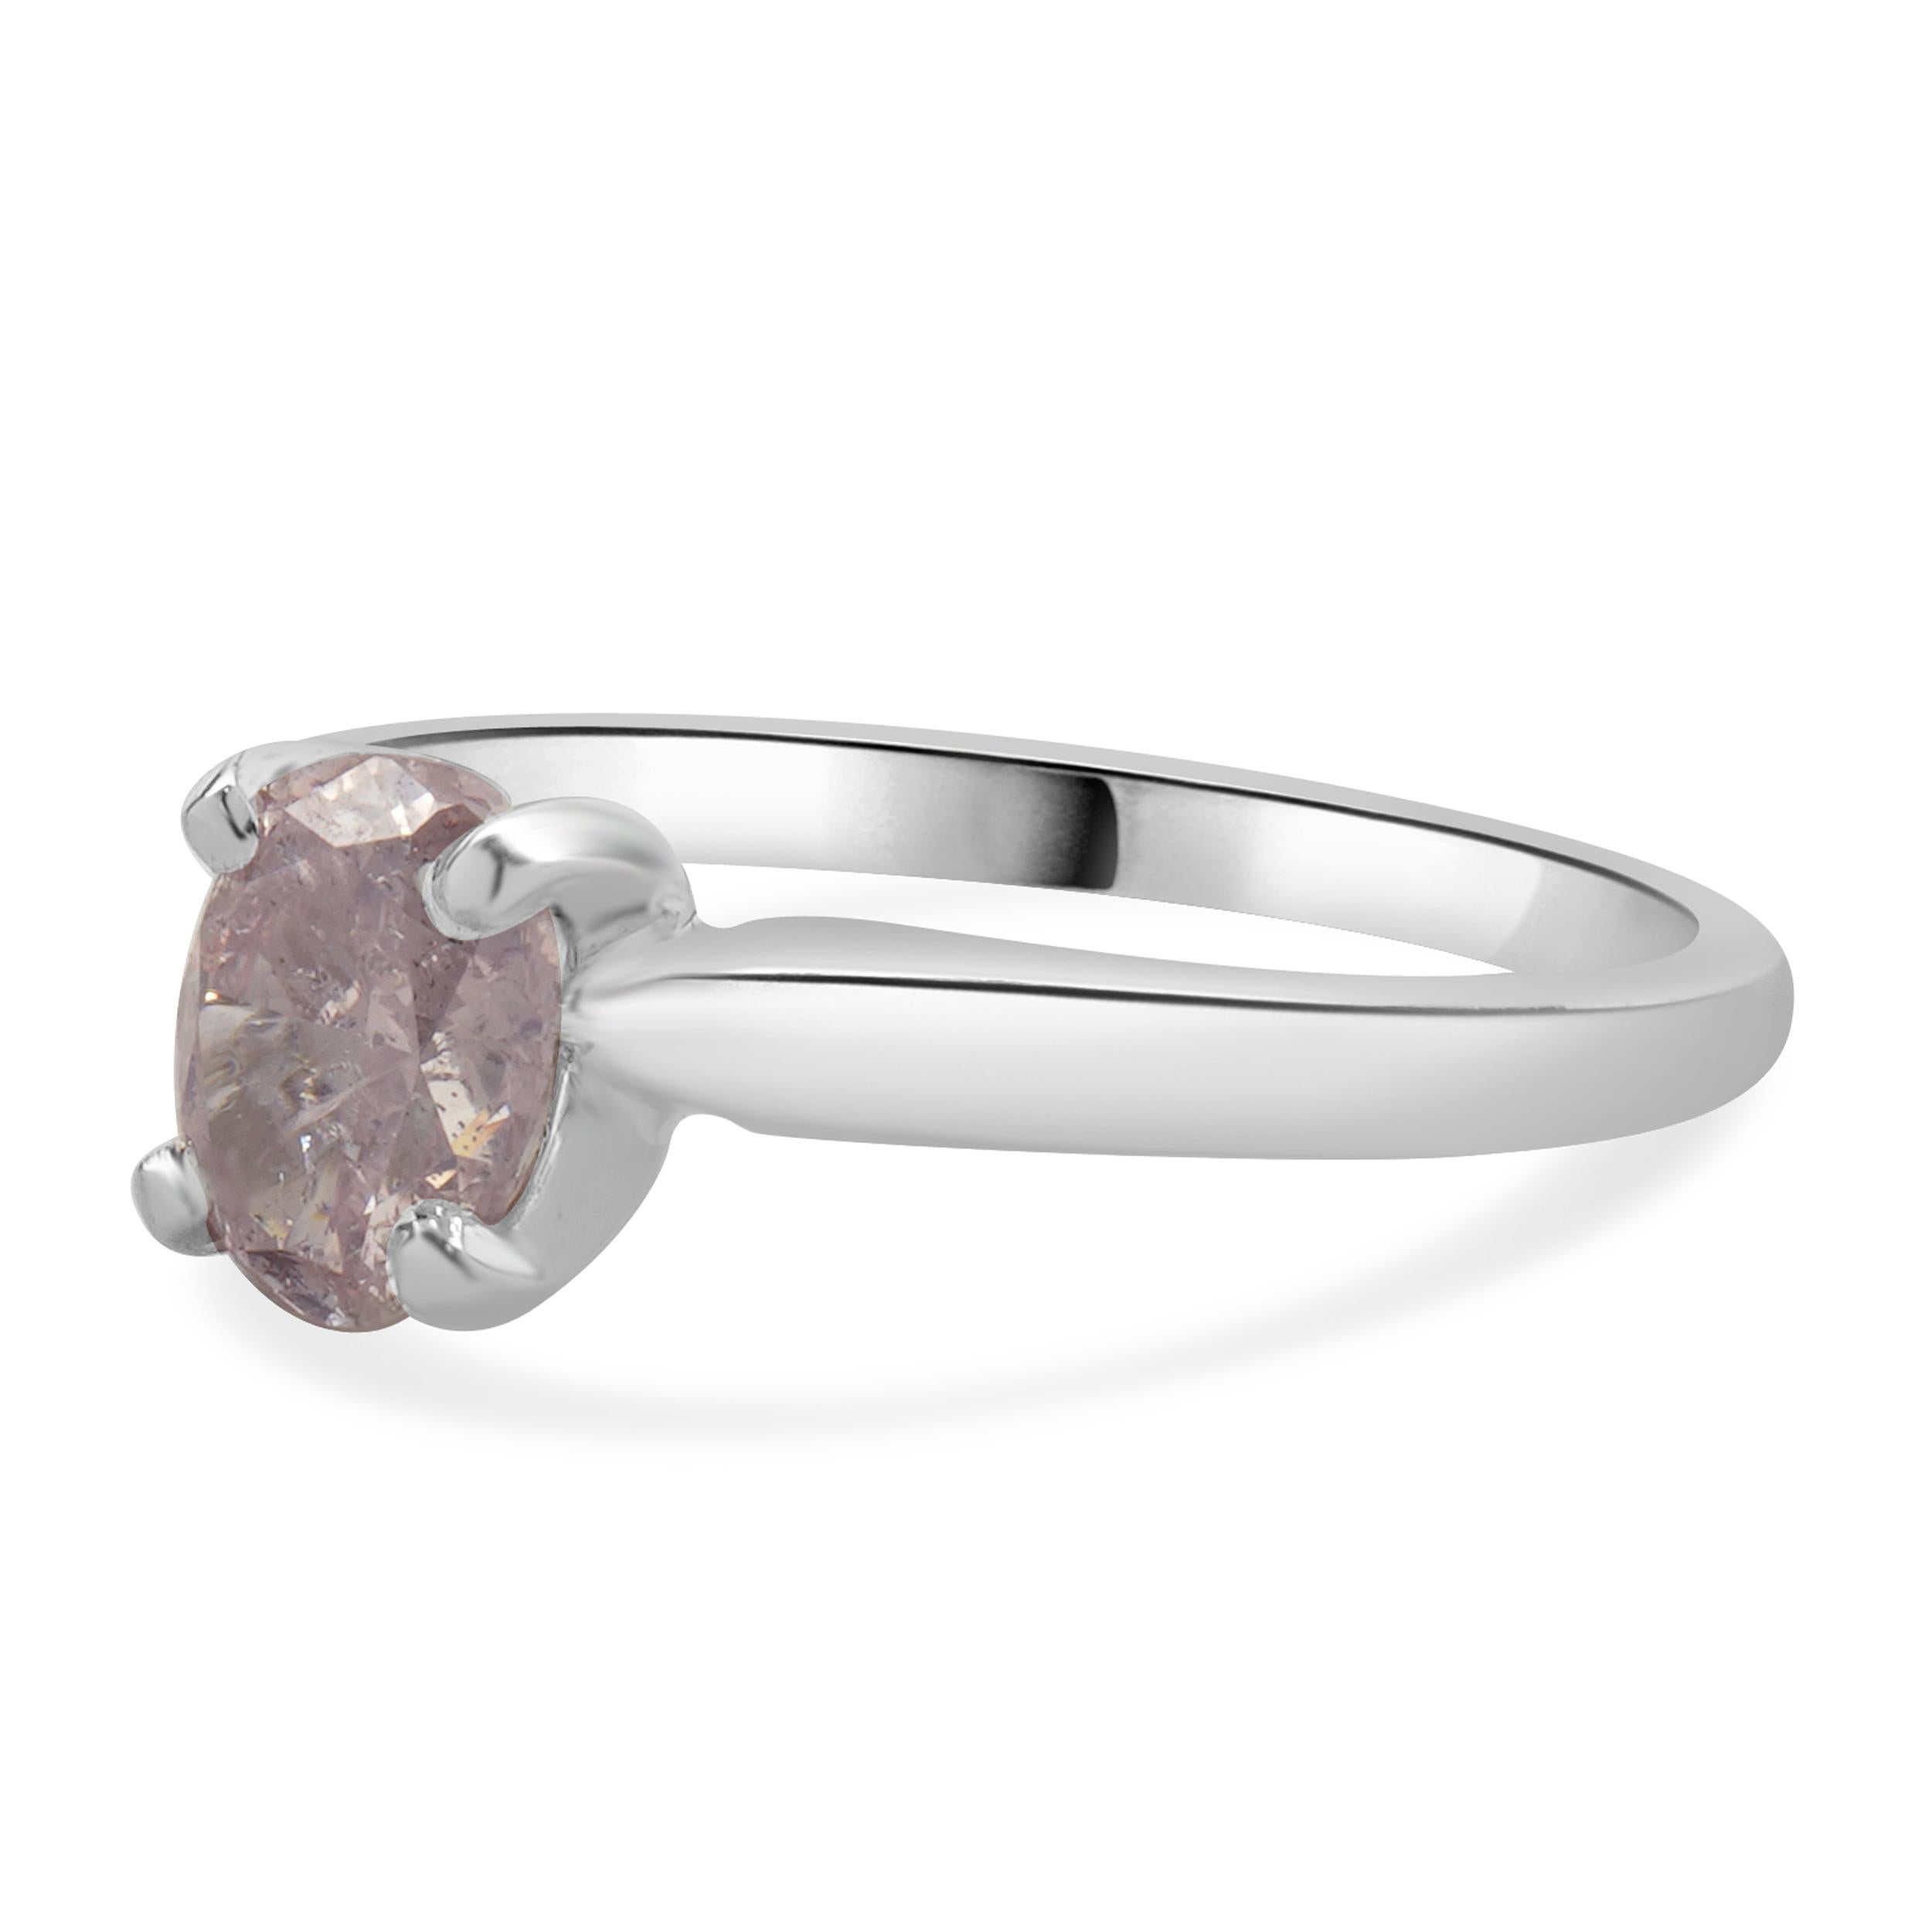 Designer: Custom
Material: 14K white gold
Diamond: 1 oval cut = 1.05ct
Color: Purplish - pink
Clarity: I1
GIA: 14323561
Dimensions: ring top measures 6.80mm wide
Ring Size: 6.5 (complimentary sizing available)
Weight: 2.52 grams
